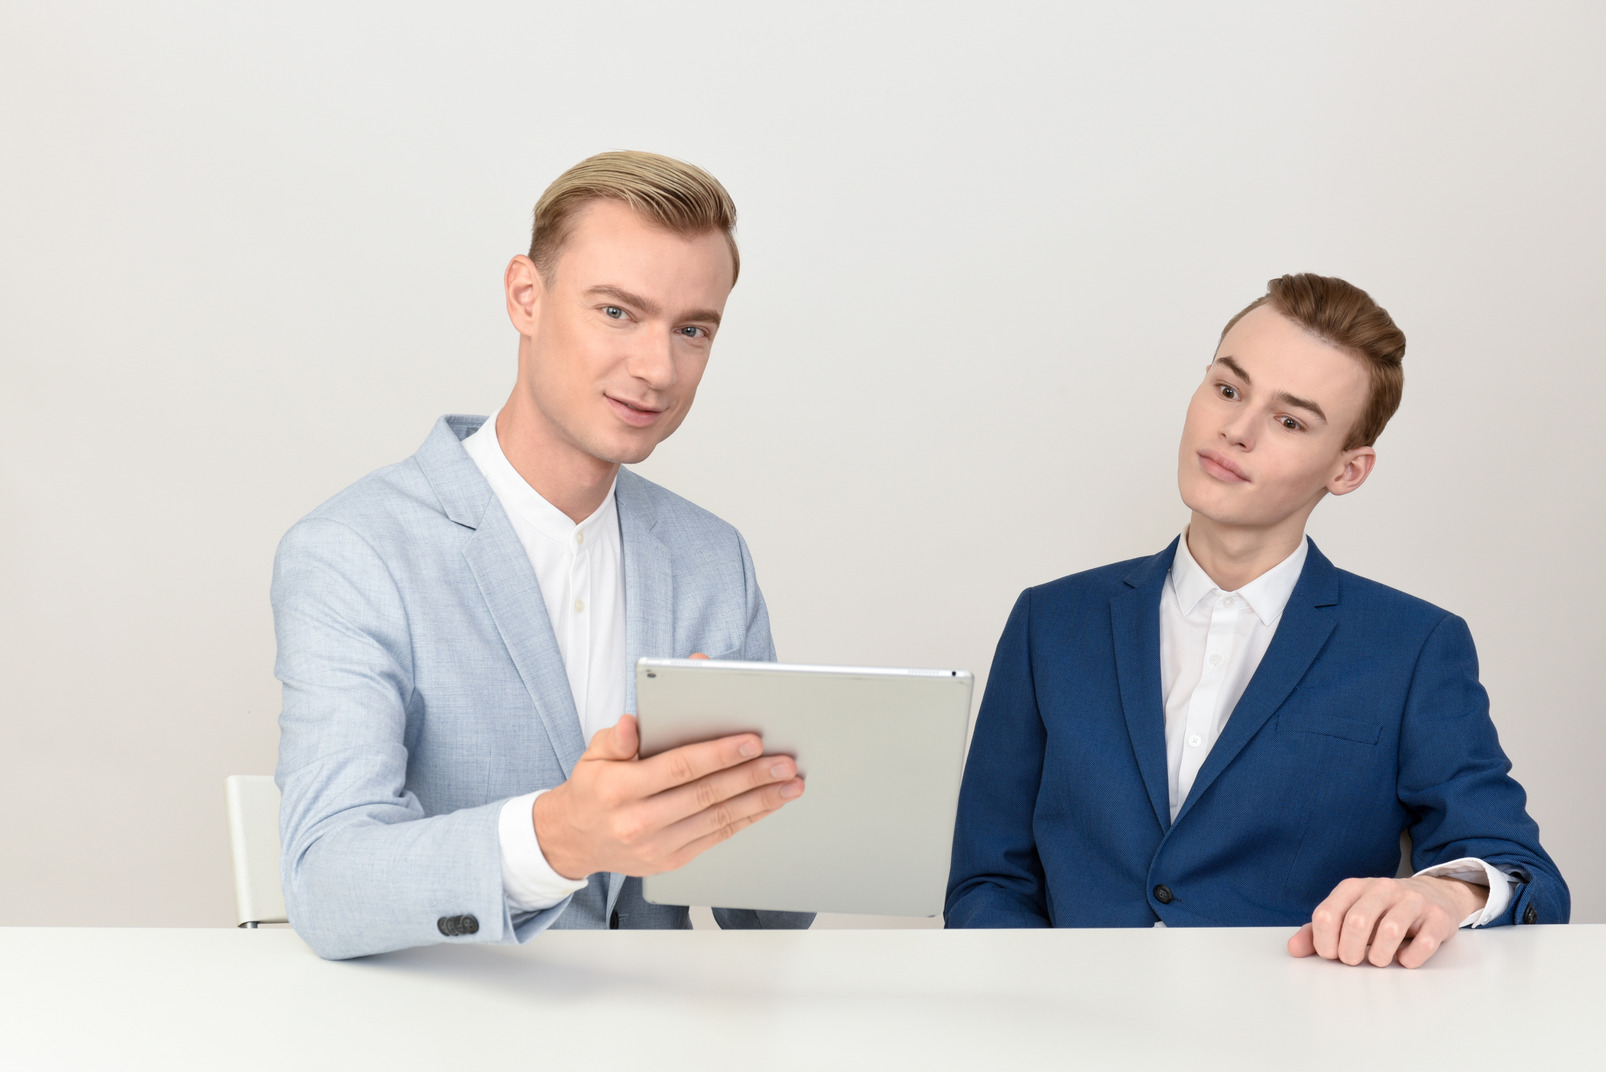 Two male colleagues looking at tablet and talking about work